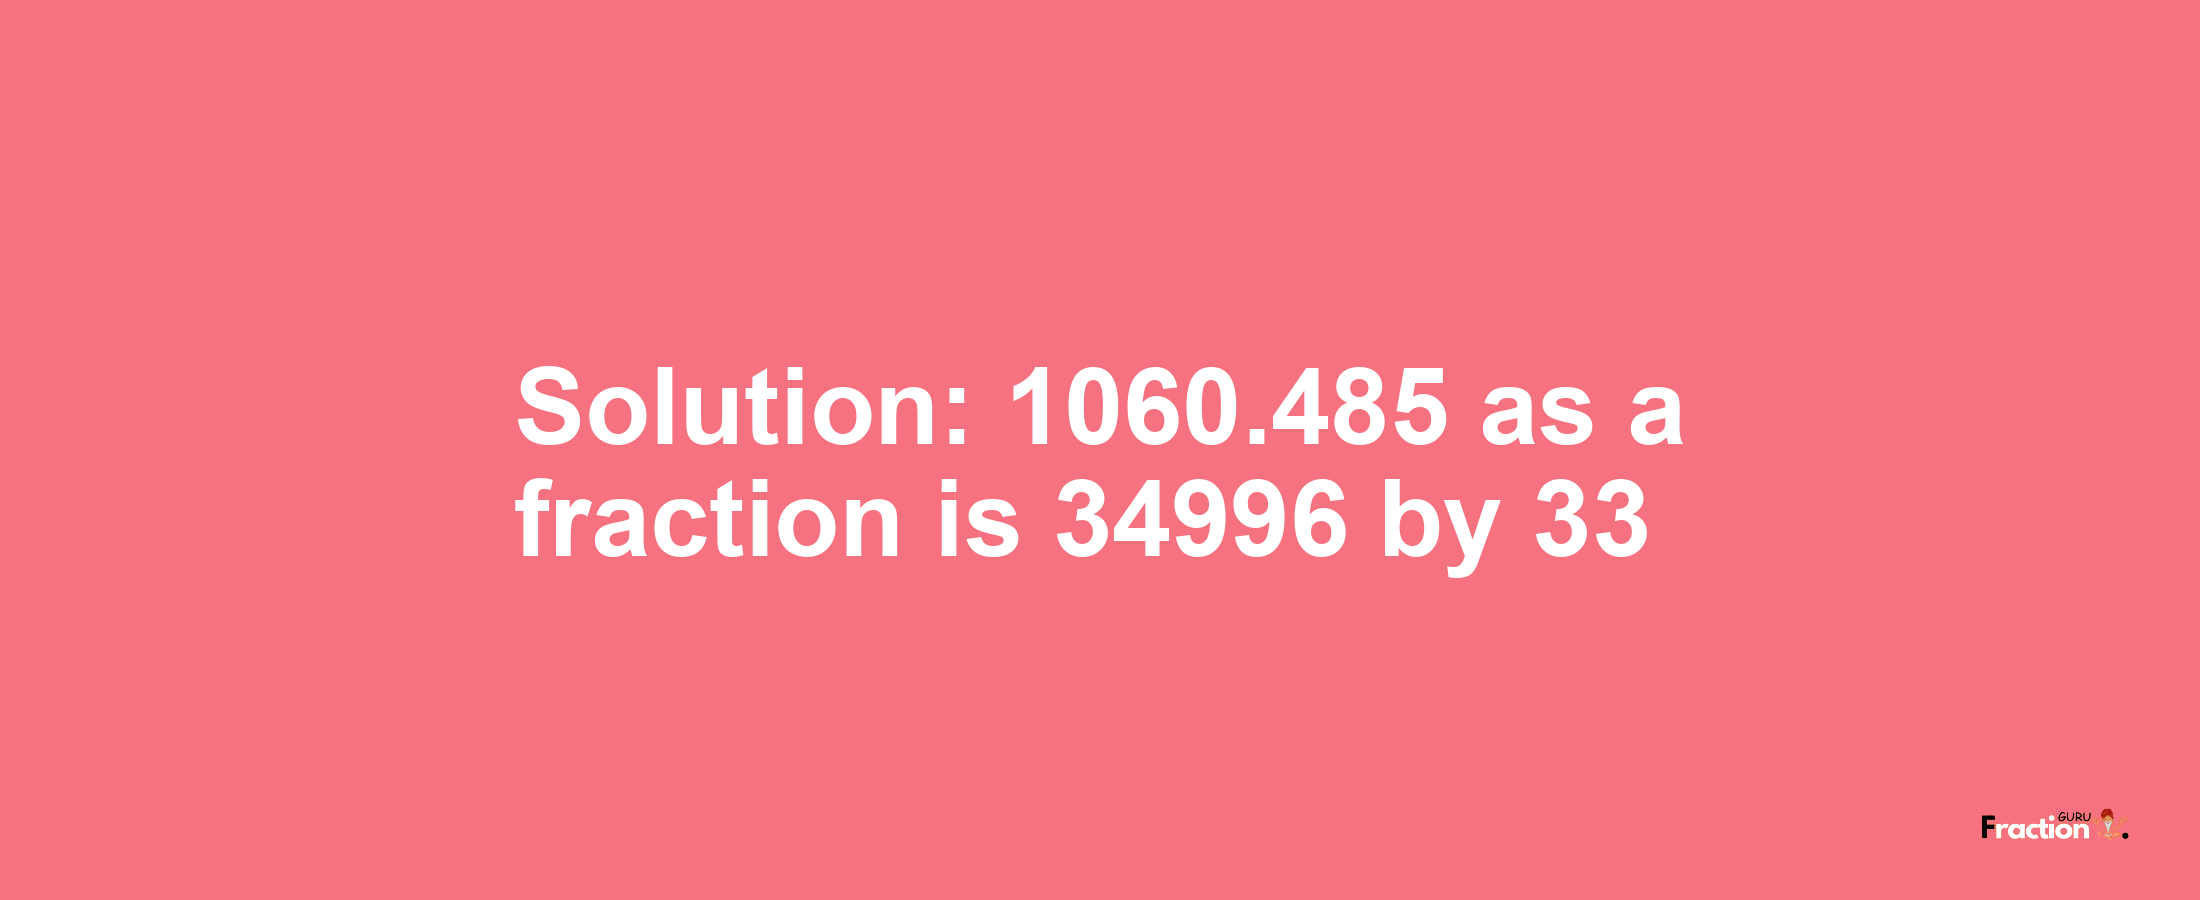 Solution:1060.485 as a fraction is 34996/33